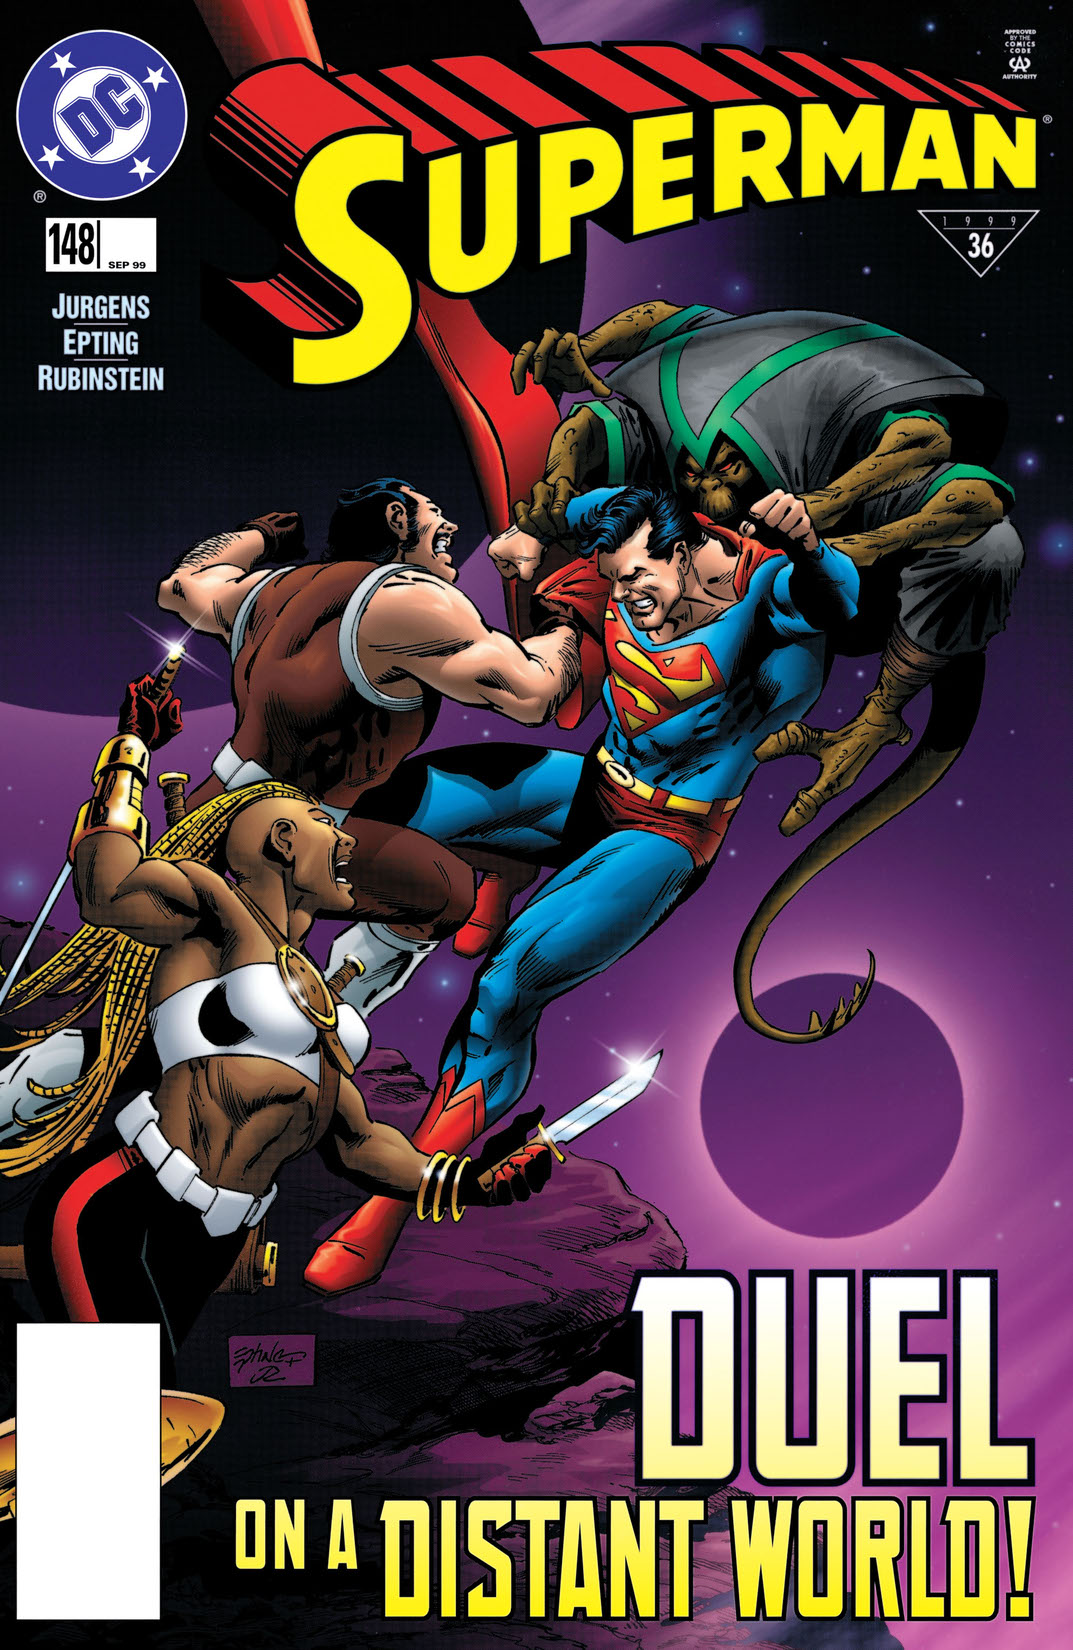 Superman (1986-2006) #148 preview images